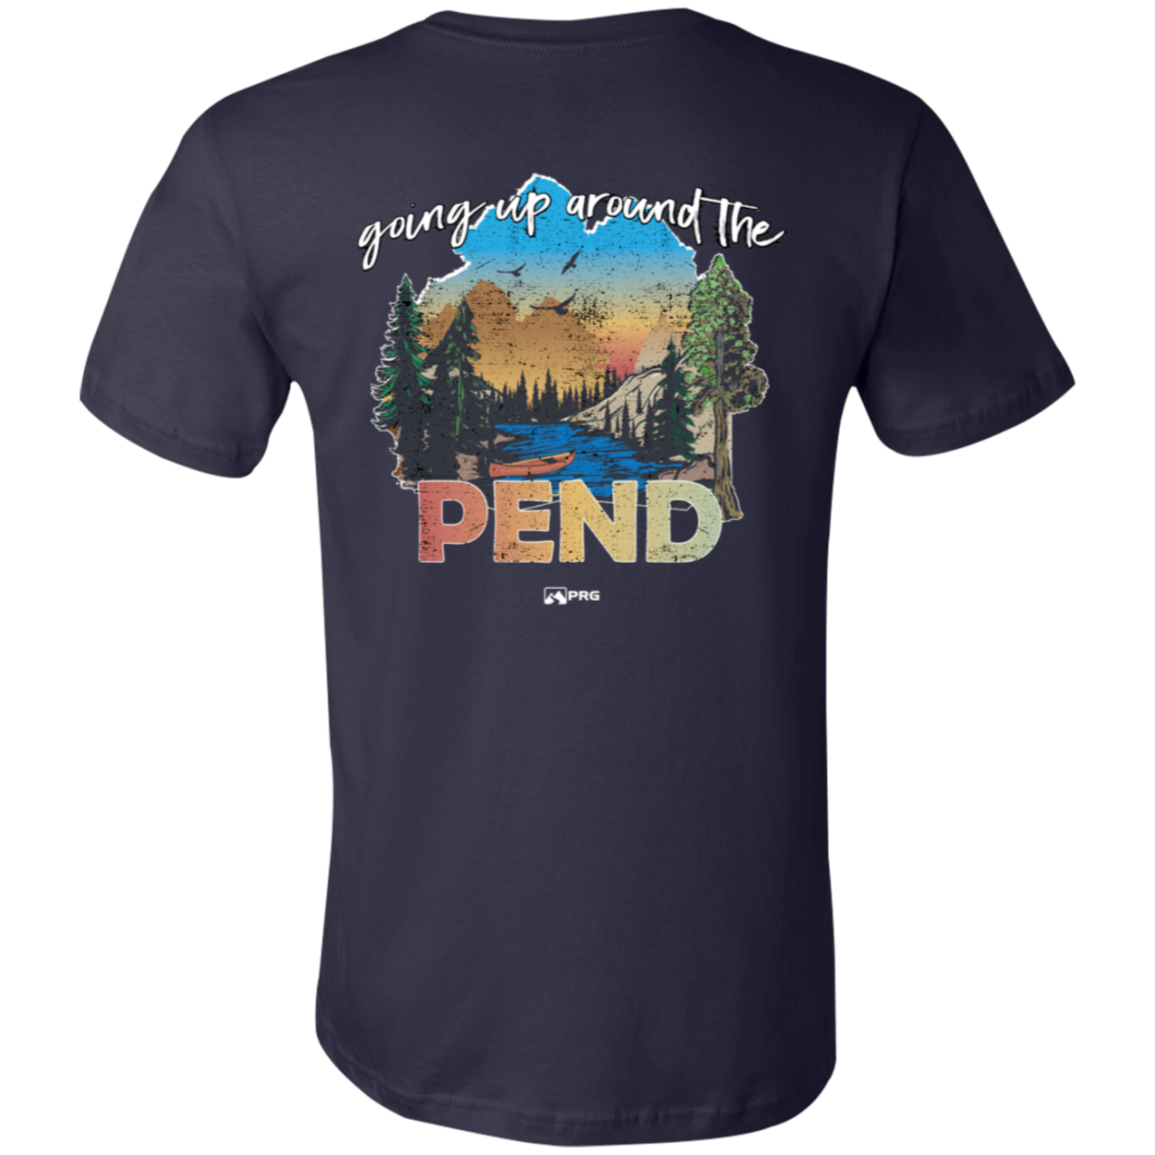 Around the Pend (Front & Back) - Shirt